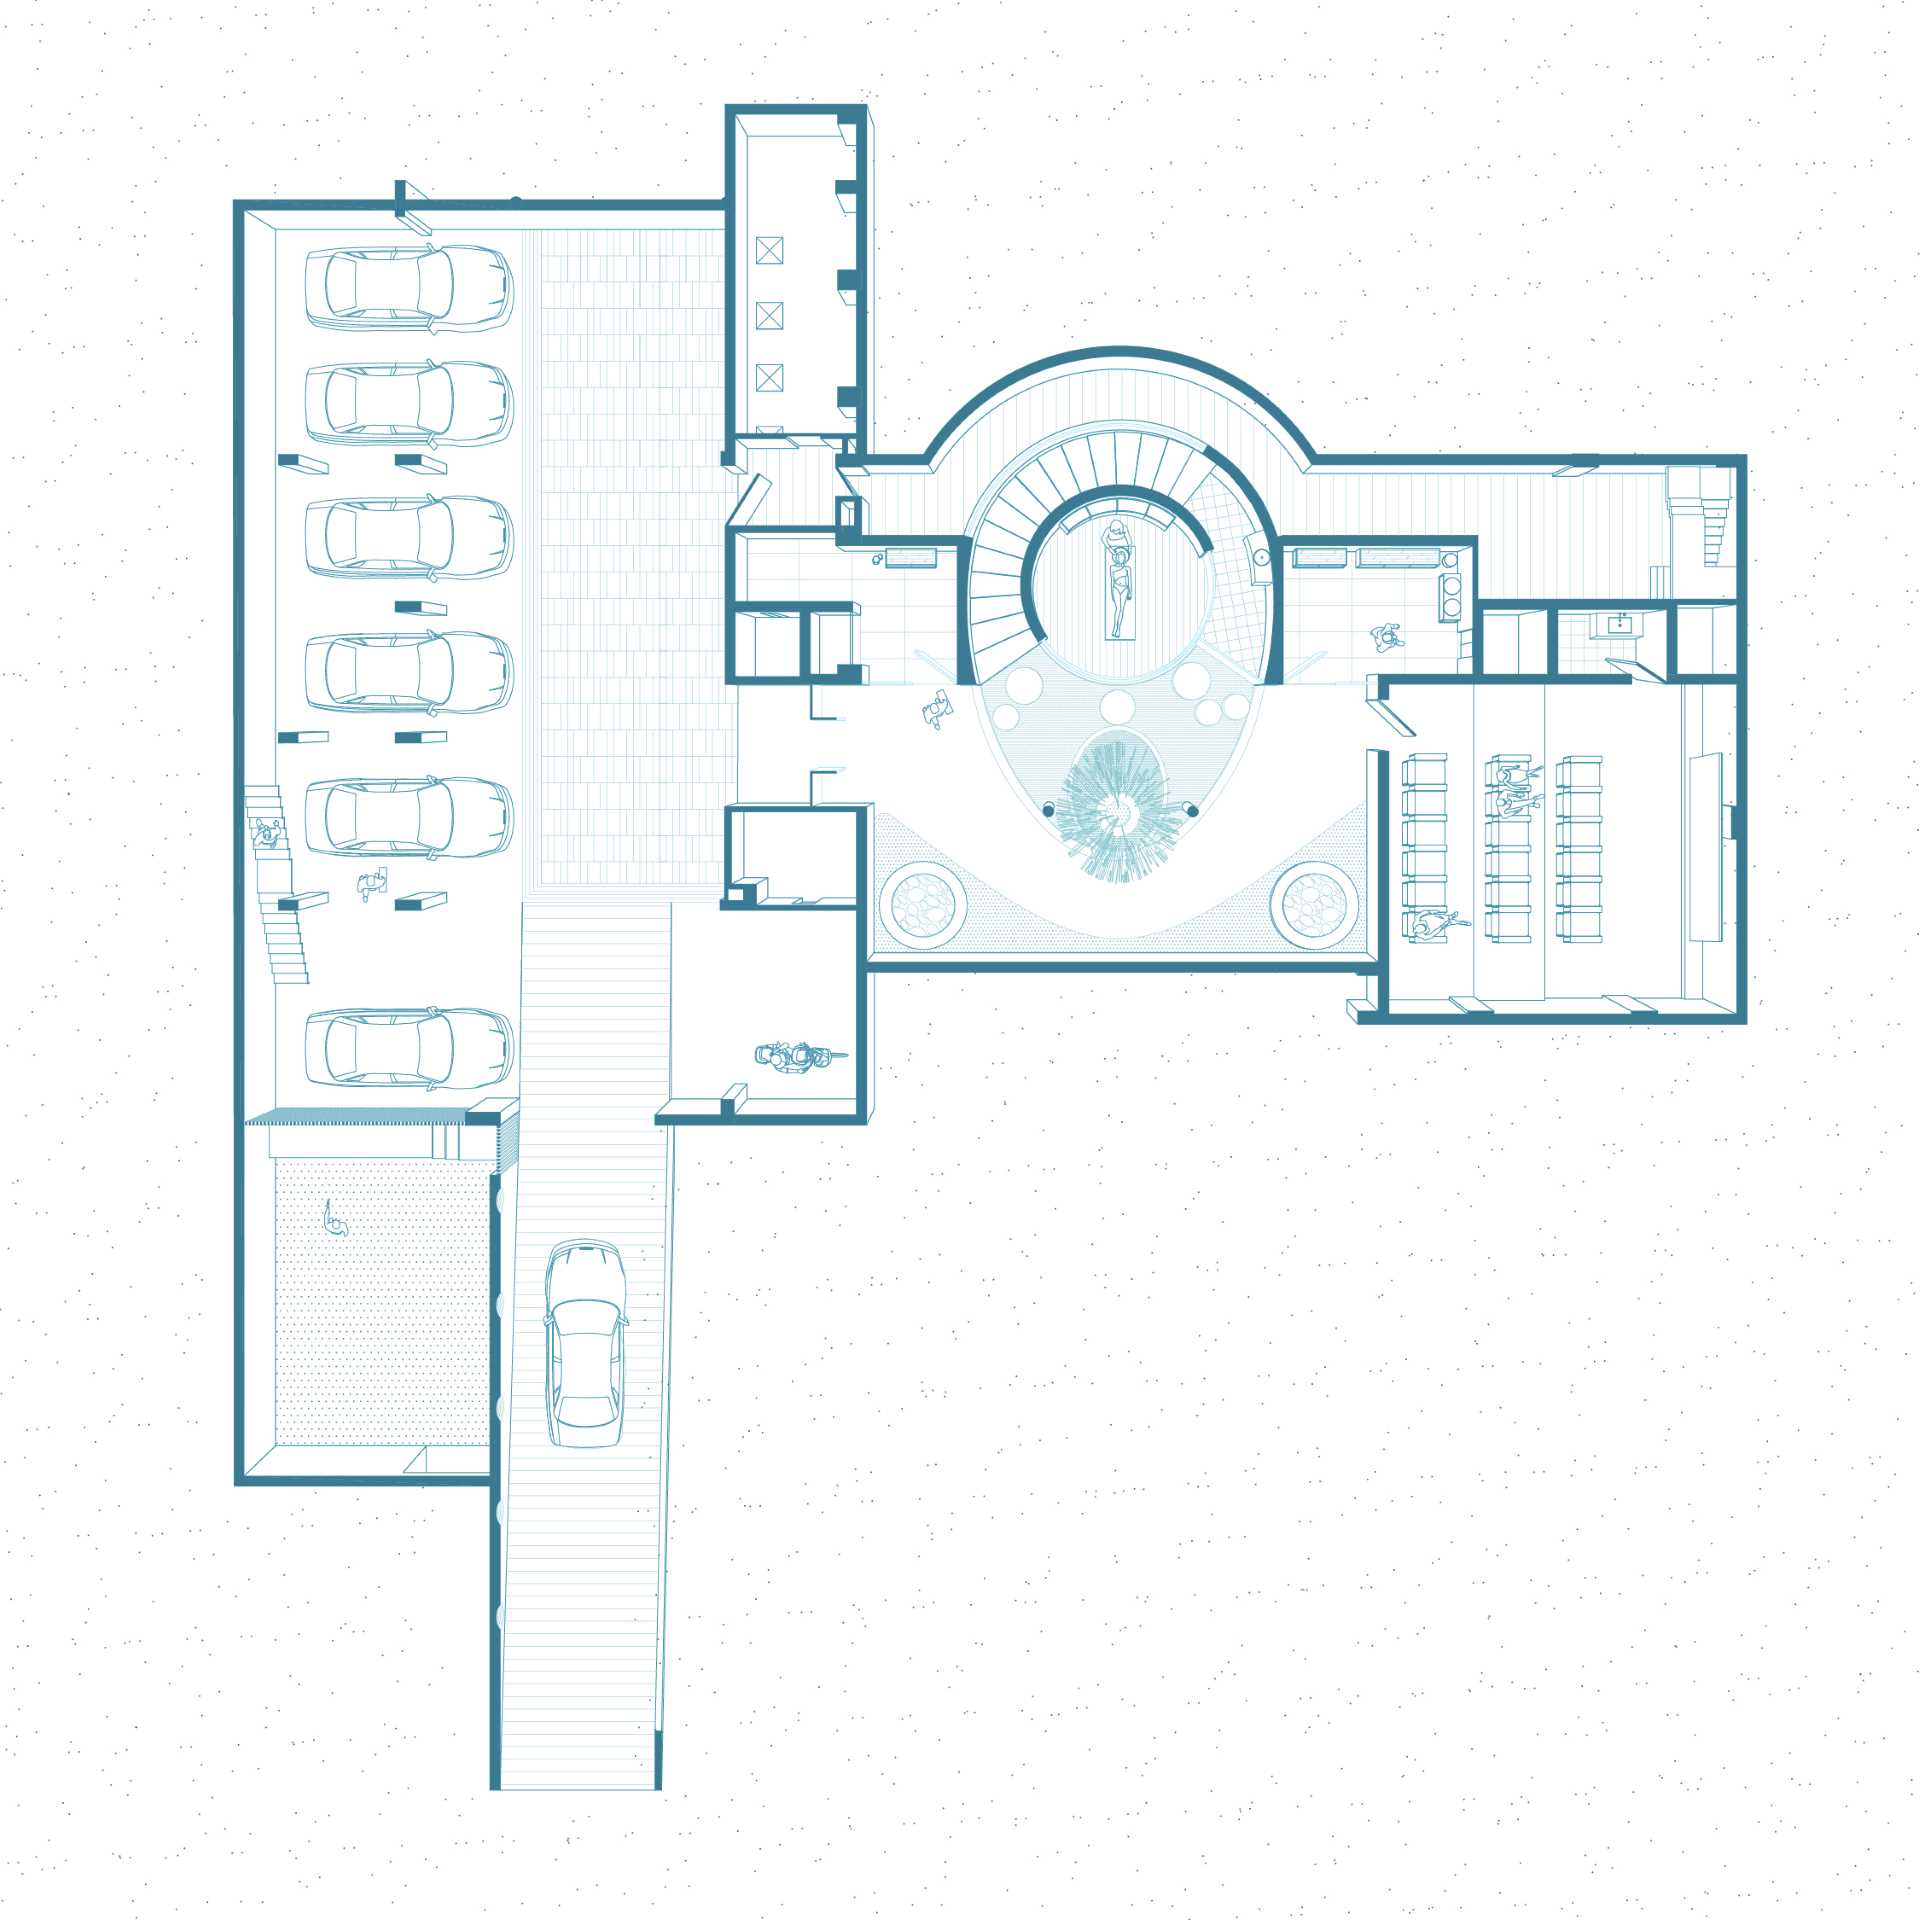 The floor plan of a modern home designed for different generations.